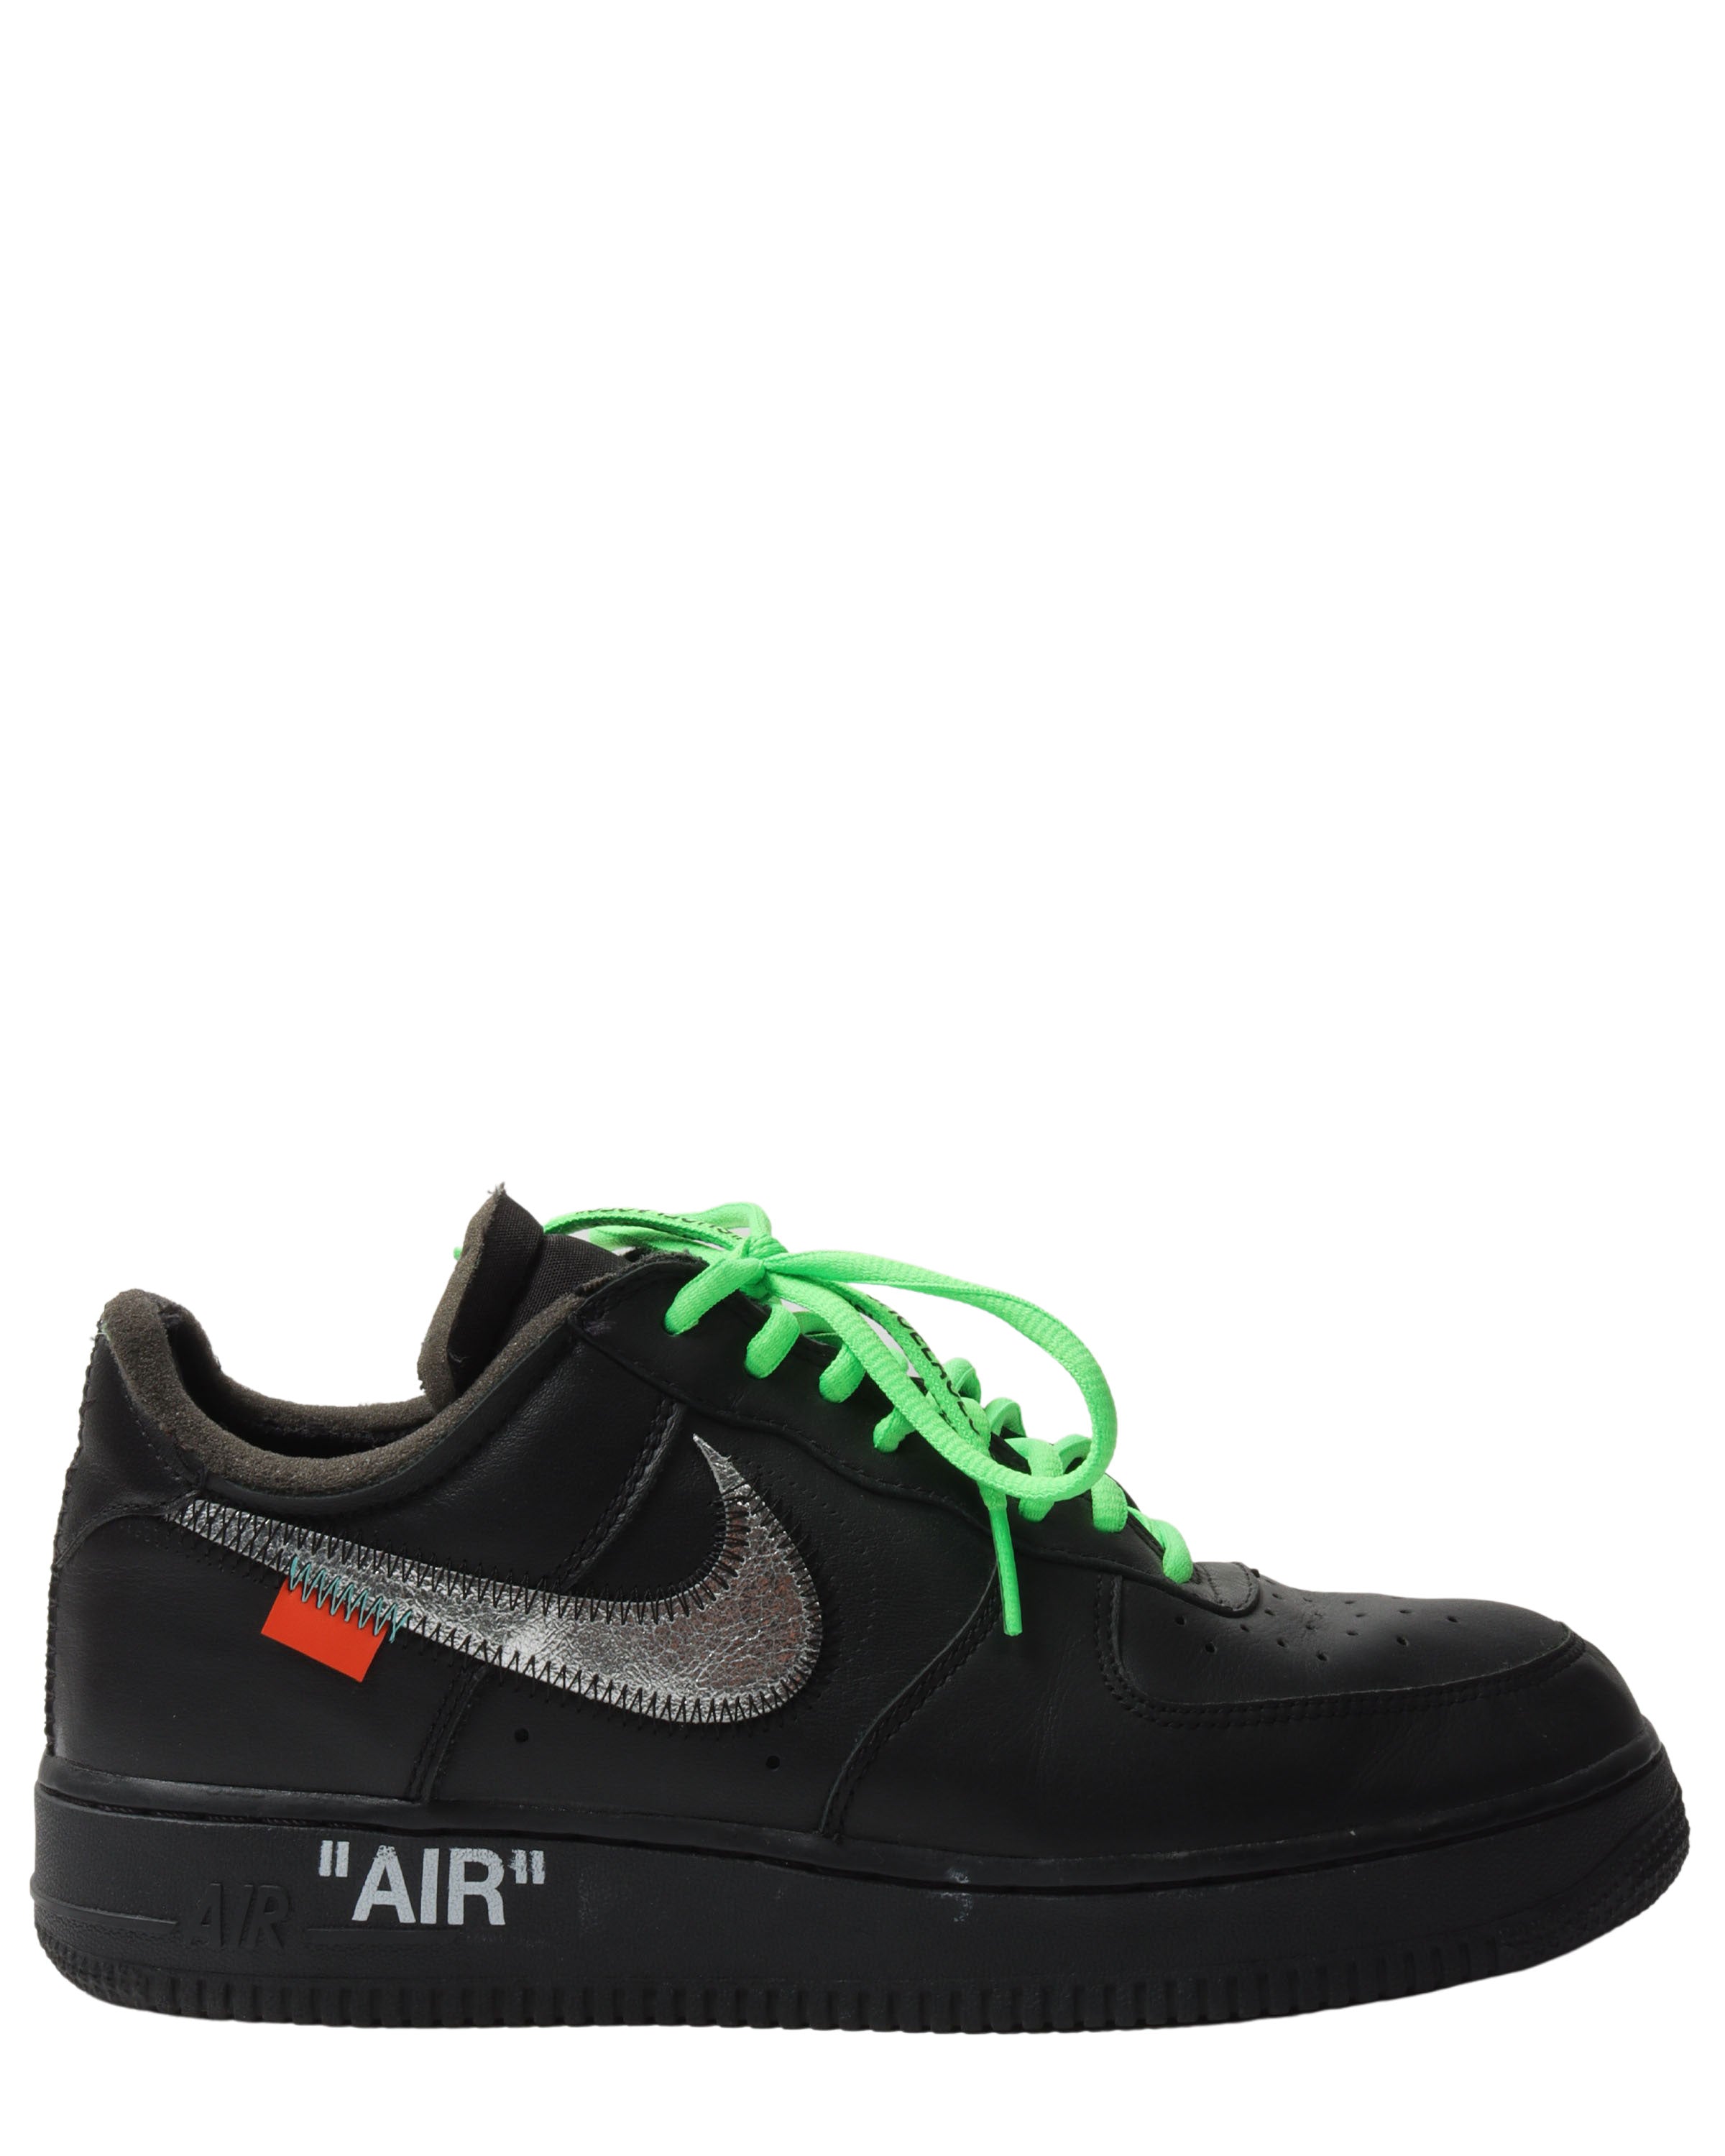 Off-White MOMA Air Force 1